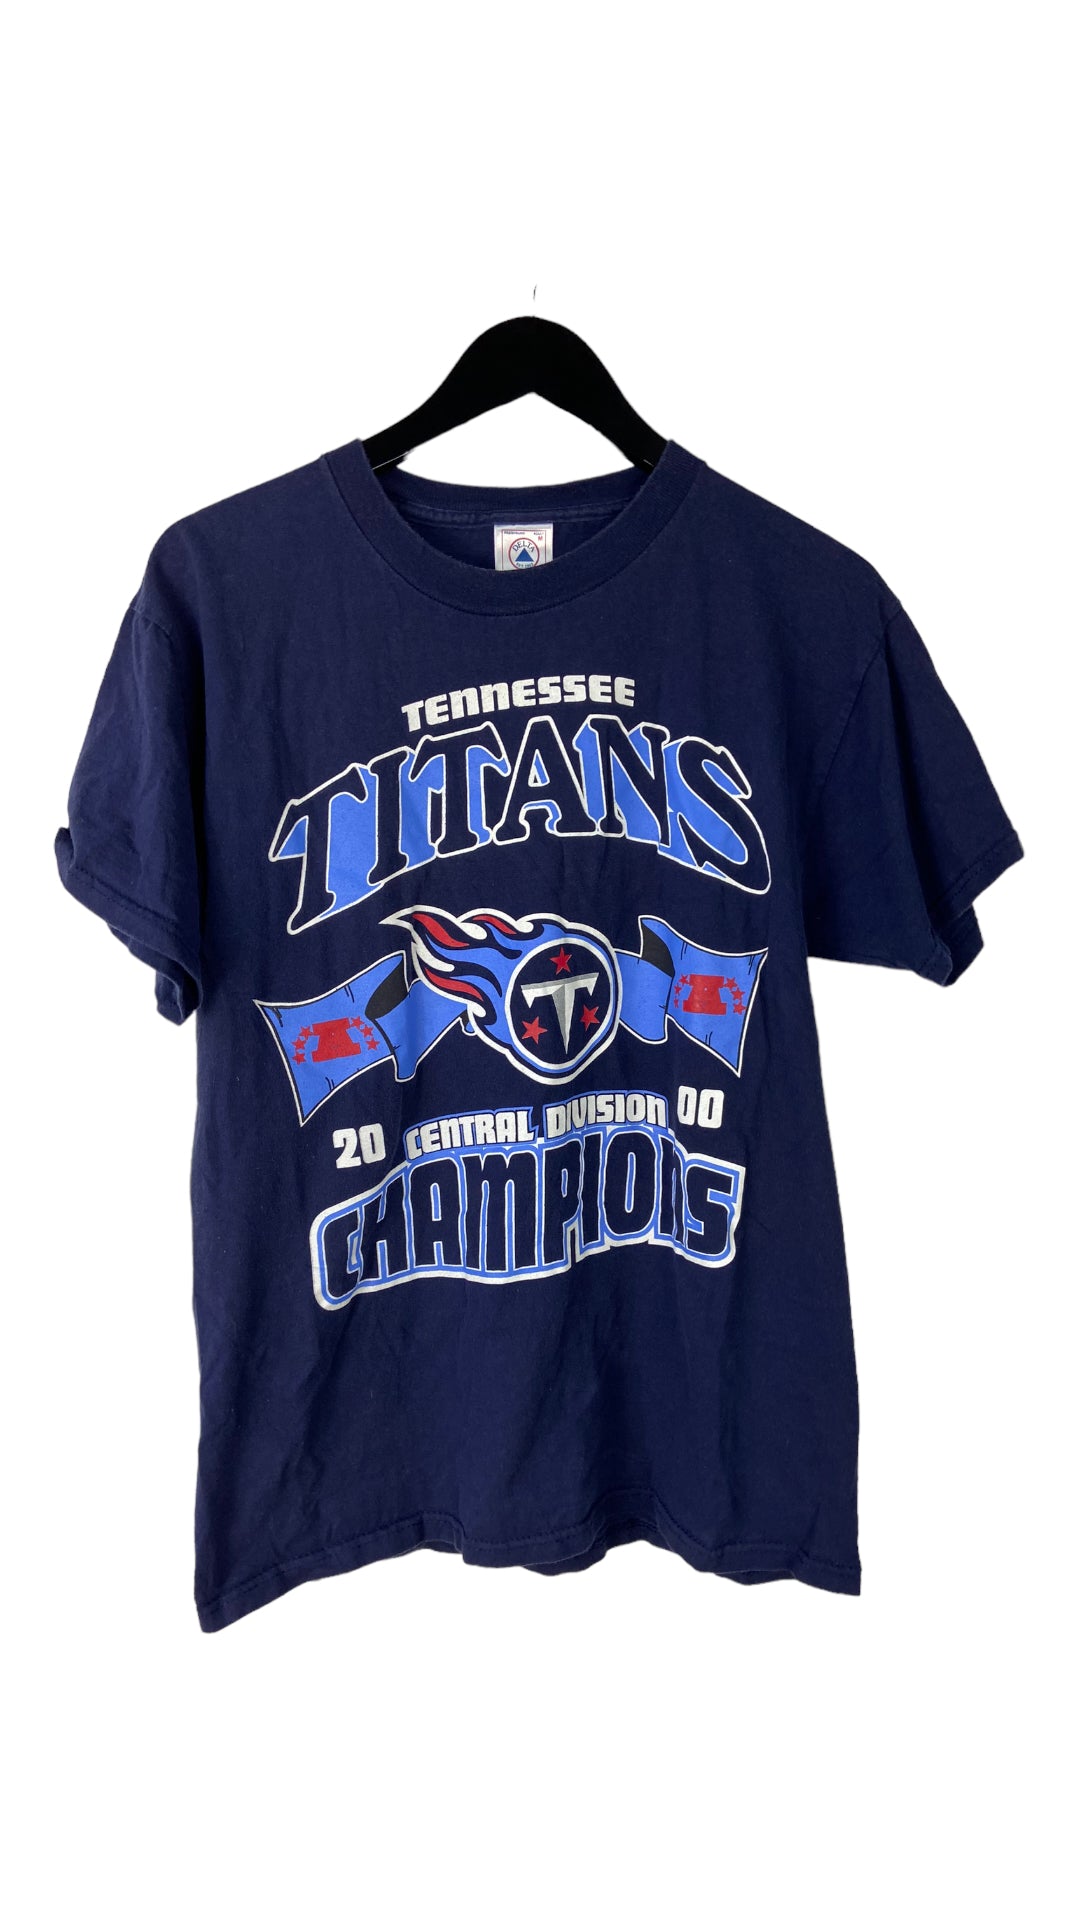 VTG Tennessee Titan 2000 Central Division Champs Tee Sz M